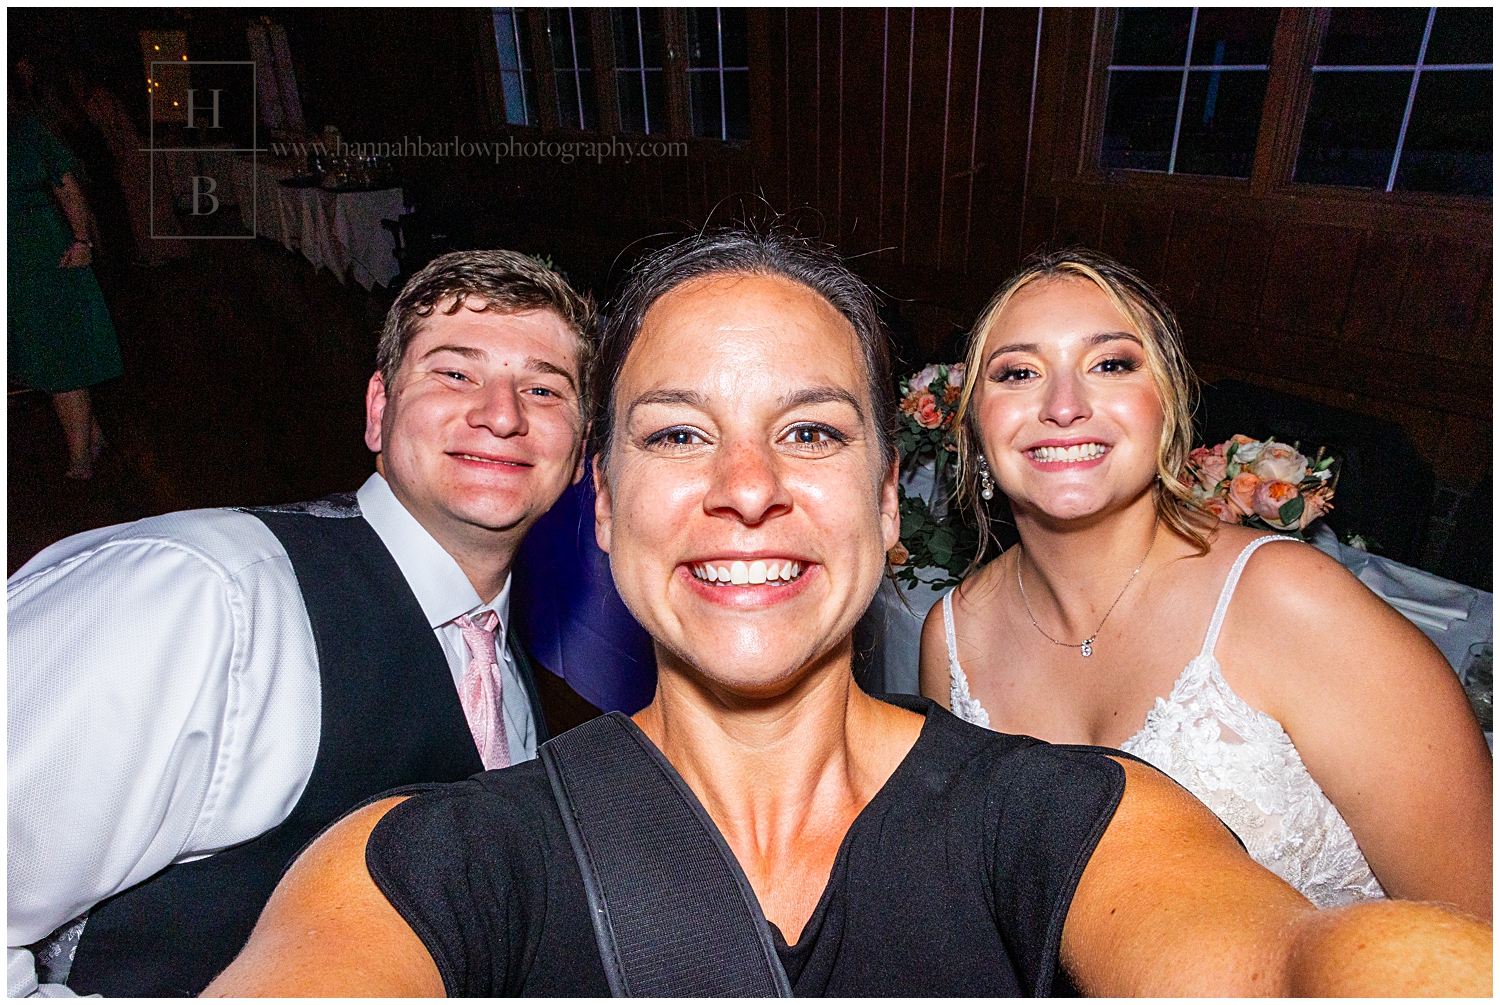 Photographer takes selfie with bride and groom